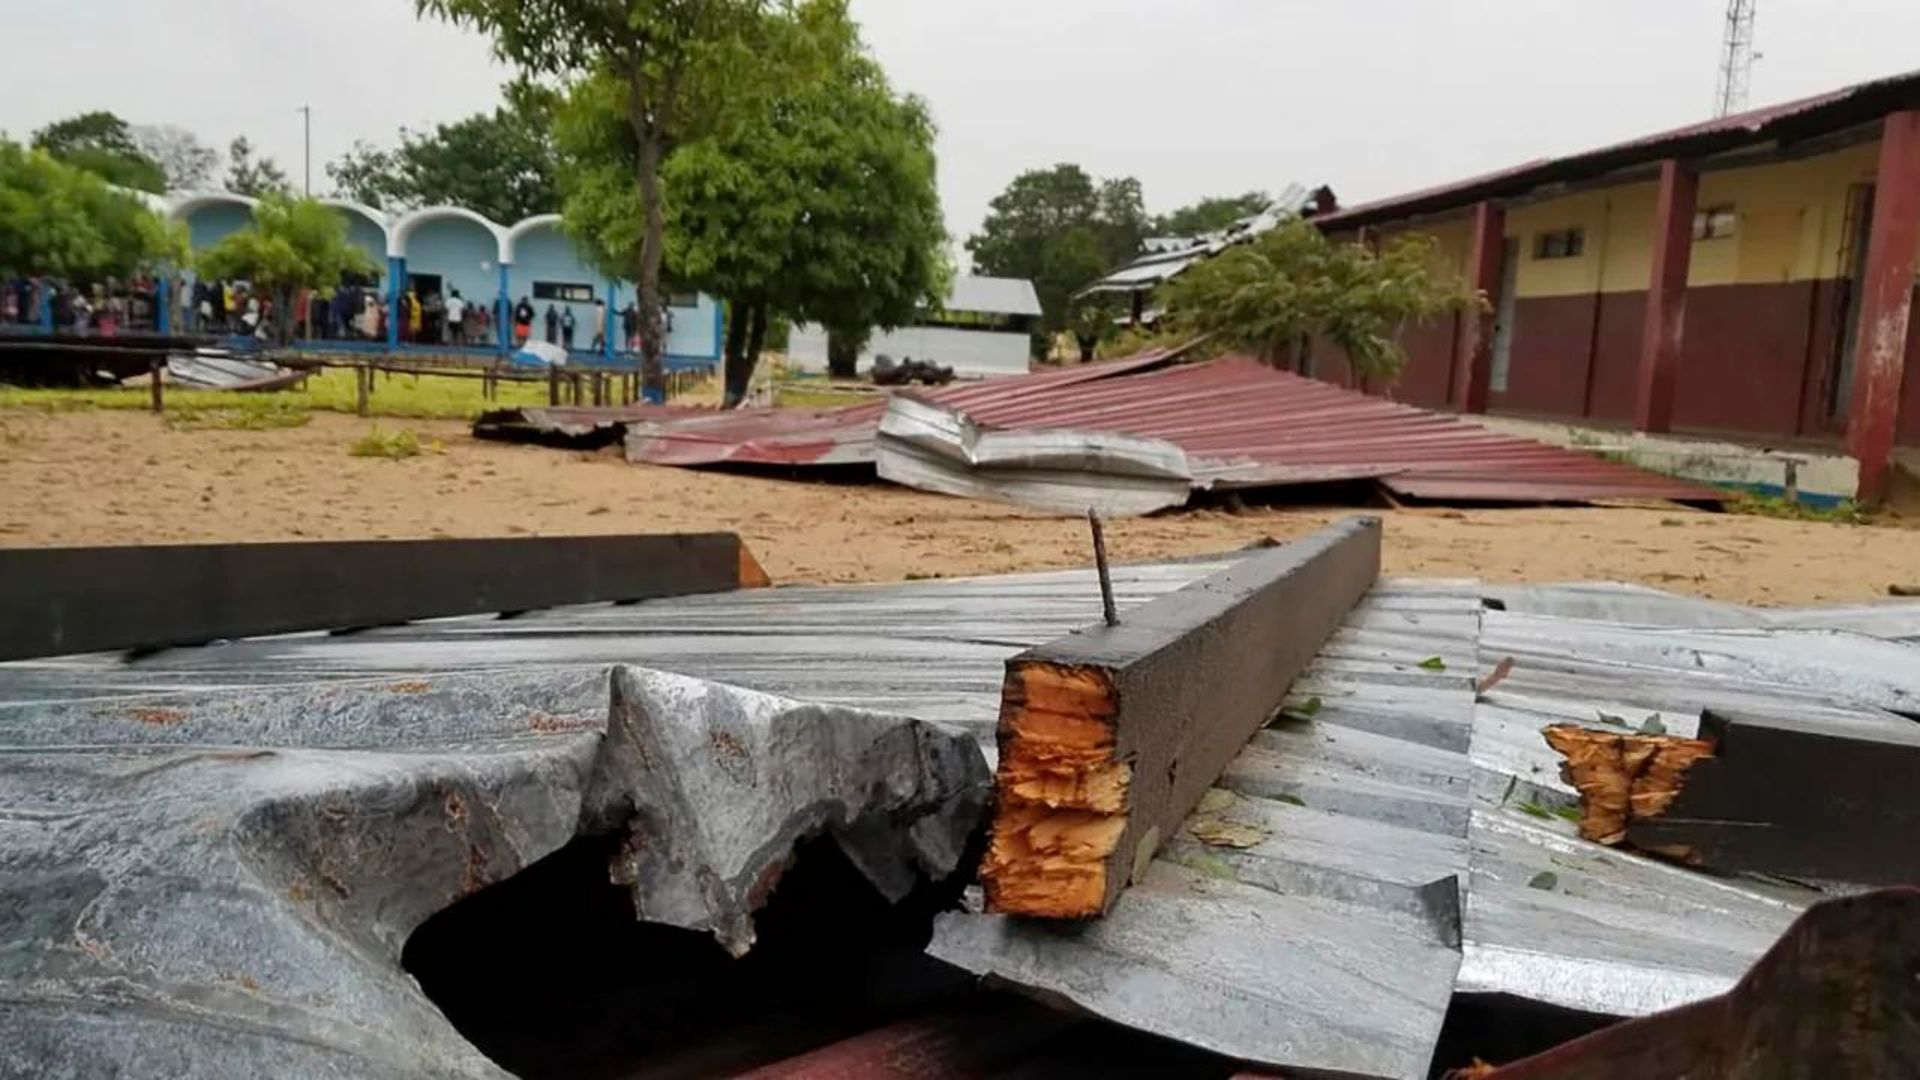 The damaged roof of a school lies in the playground in Vilanculos, Mozambique, on February 24, after Tropical Cyclone Freddy hit the country.